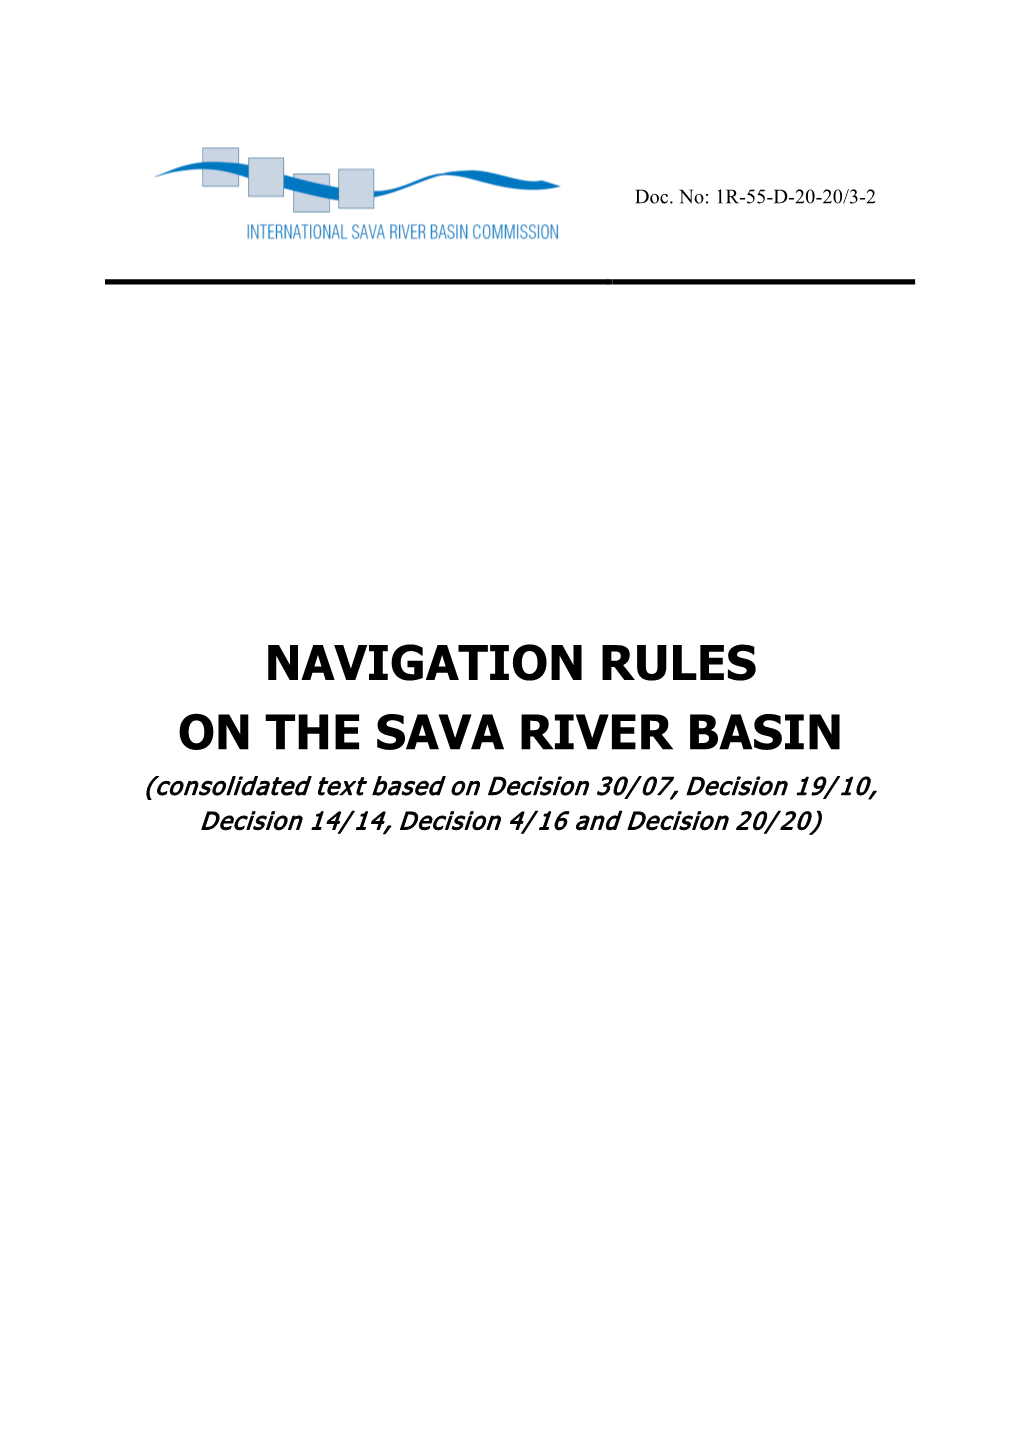 Decision 20/20 Navigation Rules in the Sava River Basin